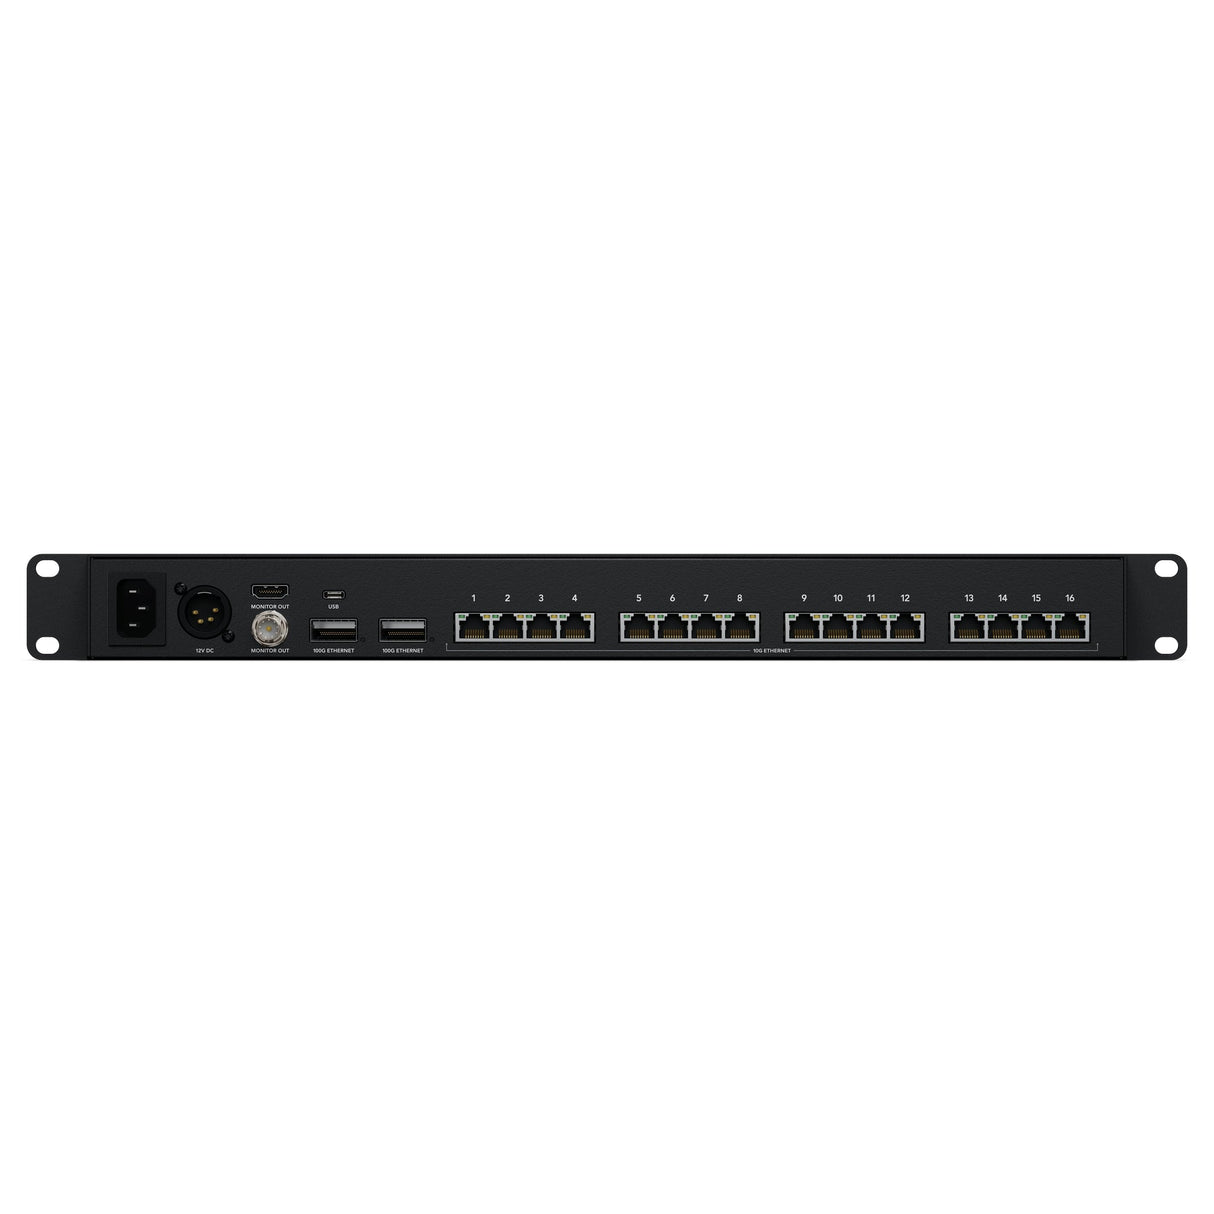 Blackmagic Design Ethernet Switch 360P with 16 10G/2 100G Ports